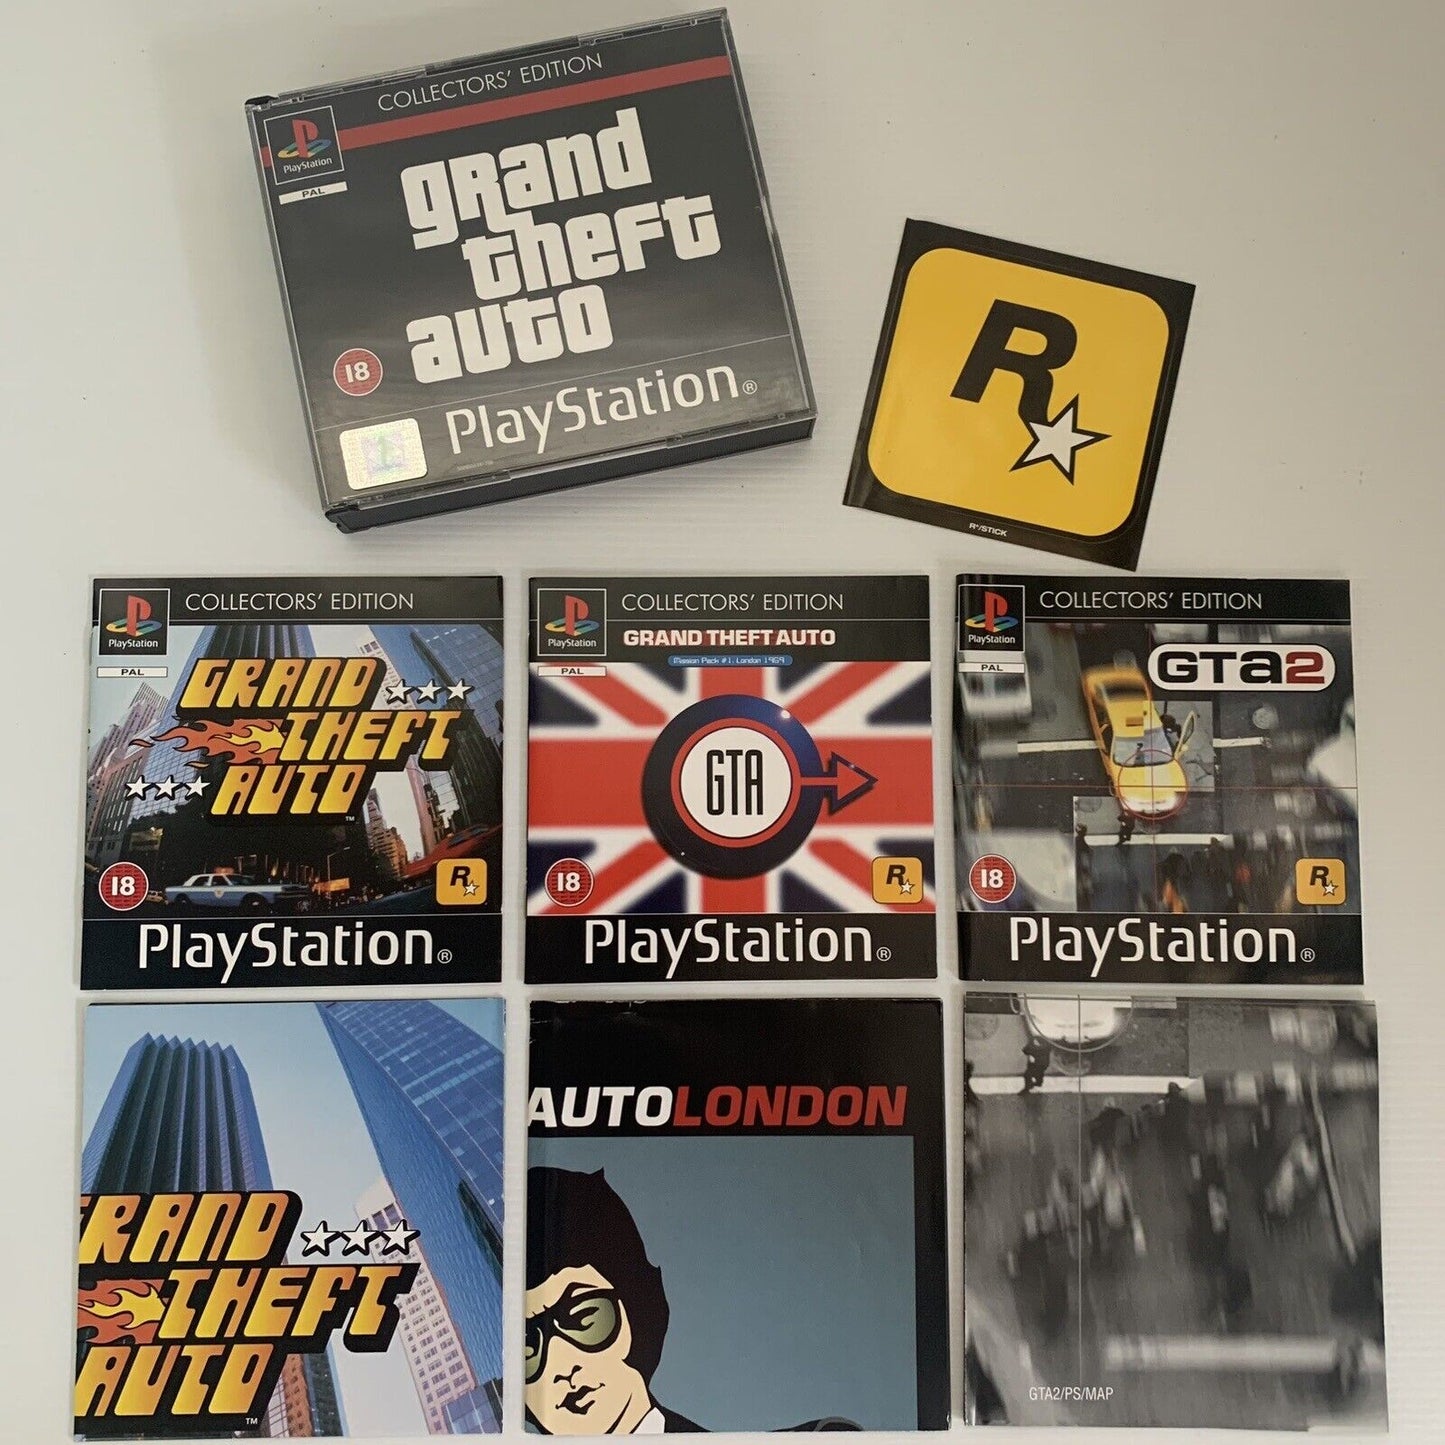 Grand Theft Auto Collectors Edition PlayStation PS1